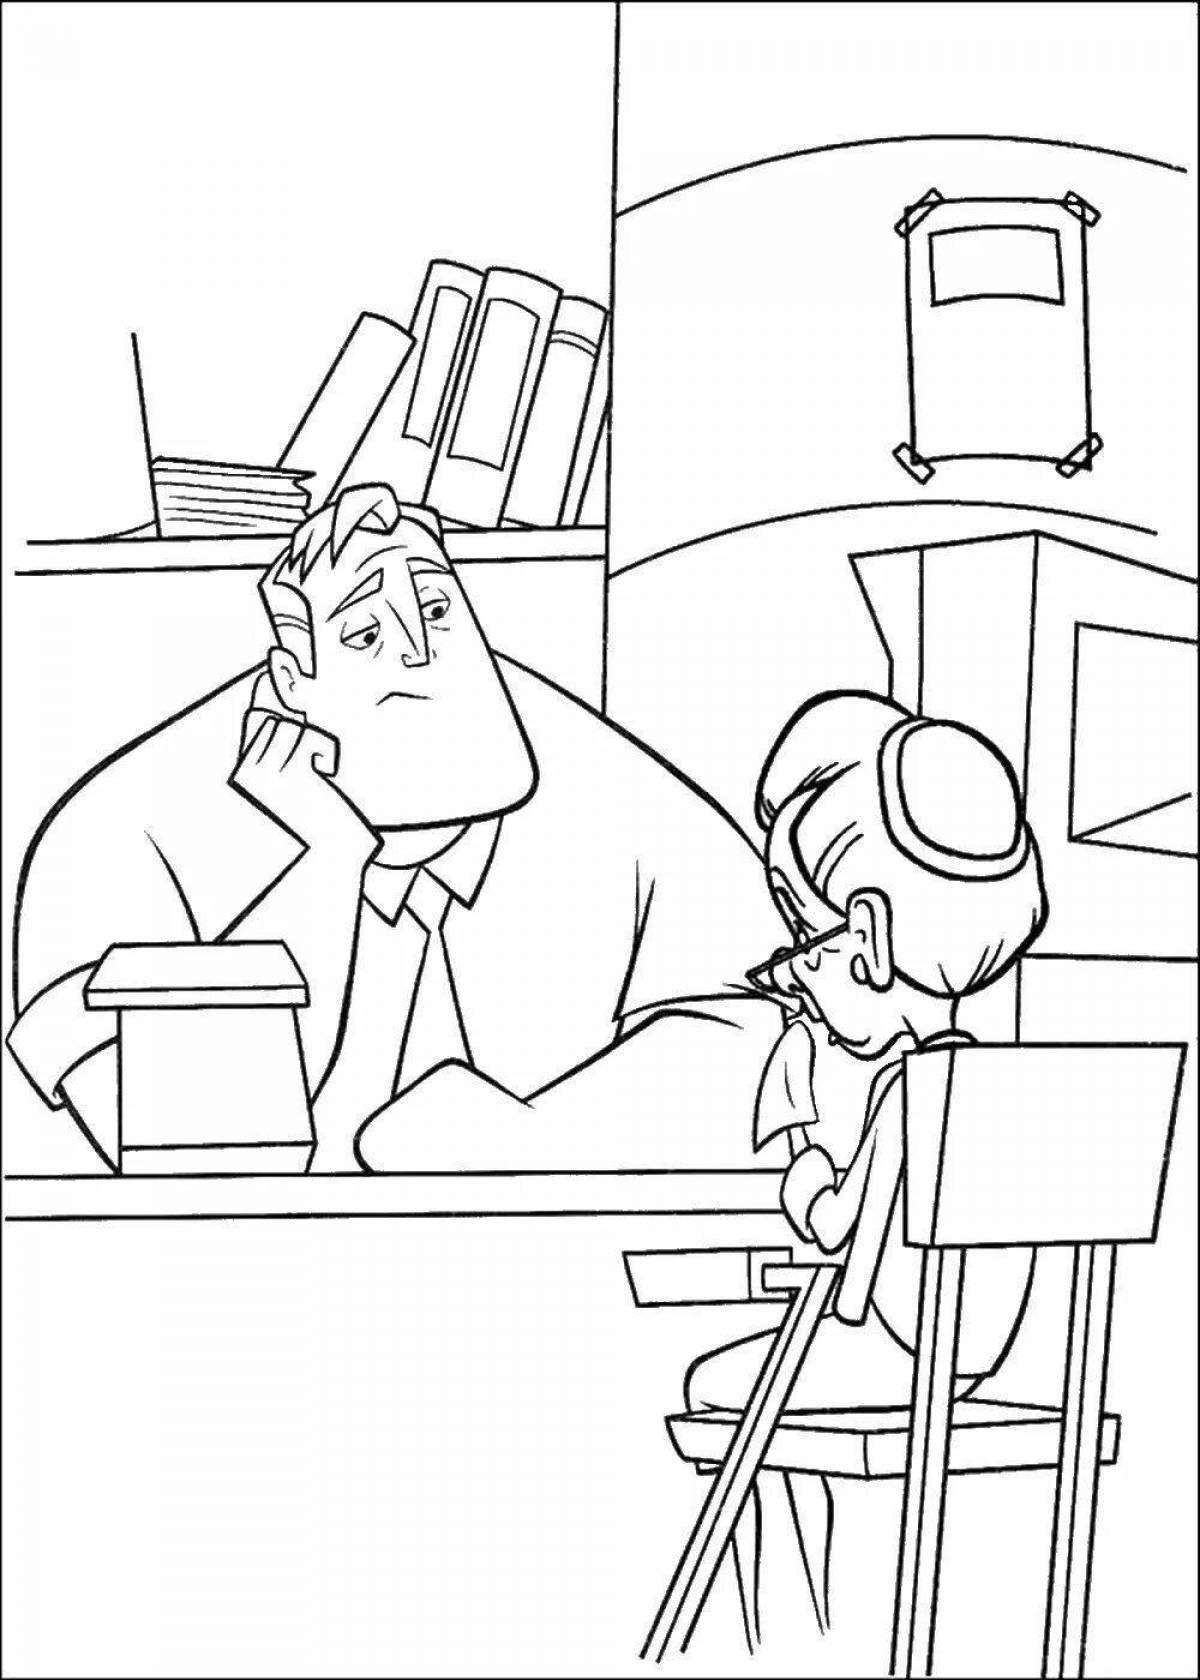 Coloring page cheerful lawyer